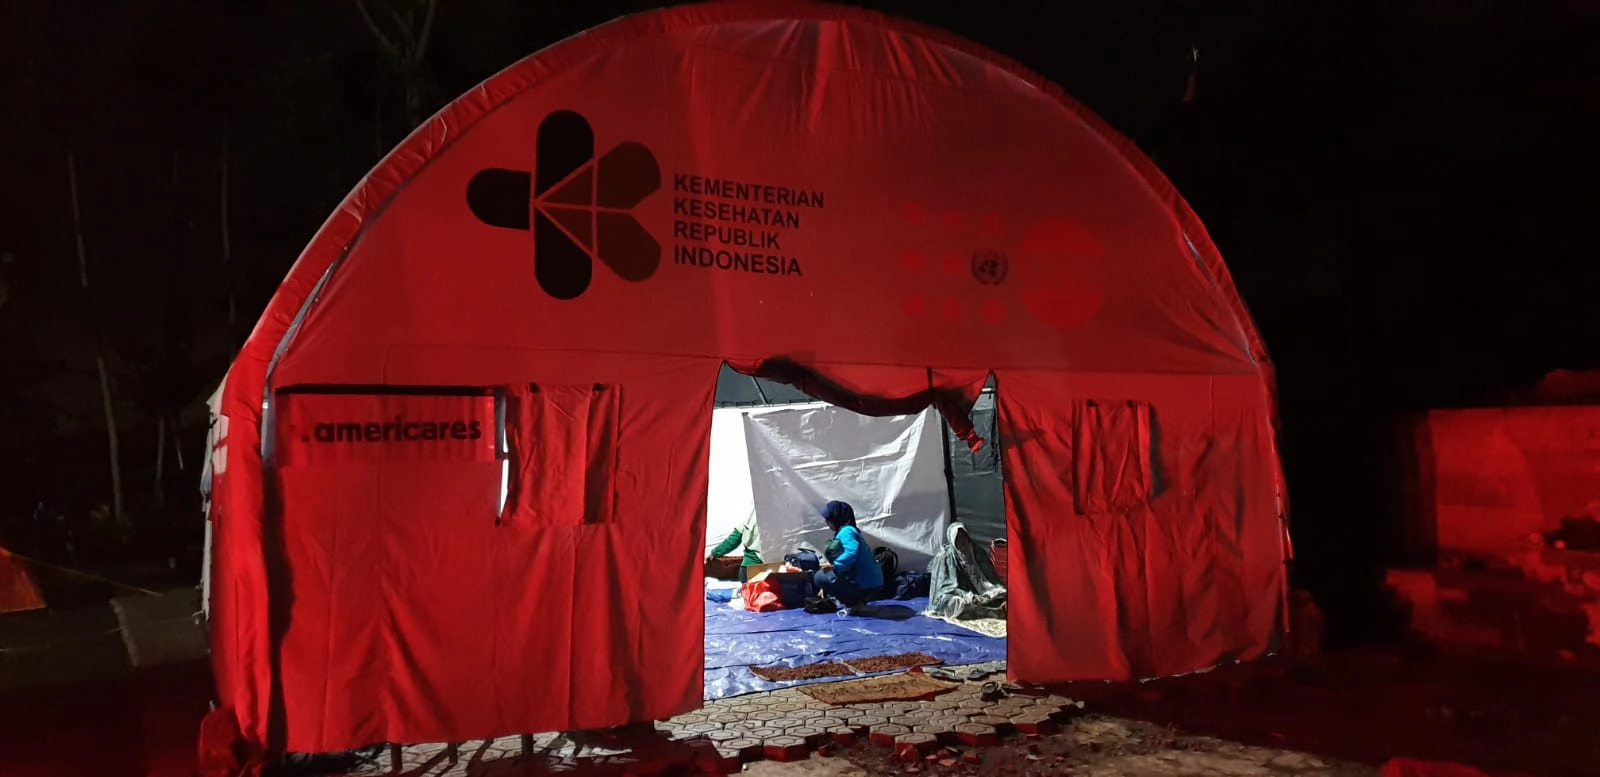 Red tent for health care with americares logo on outside with woman inside